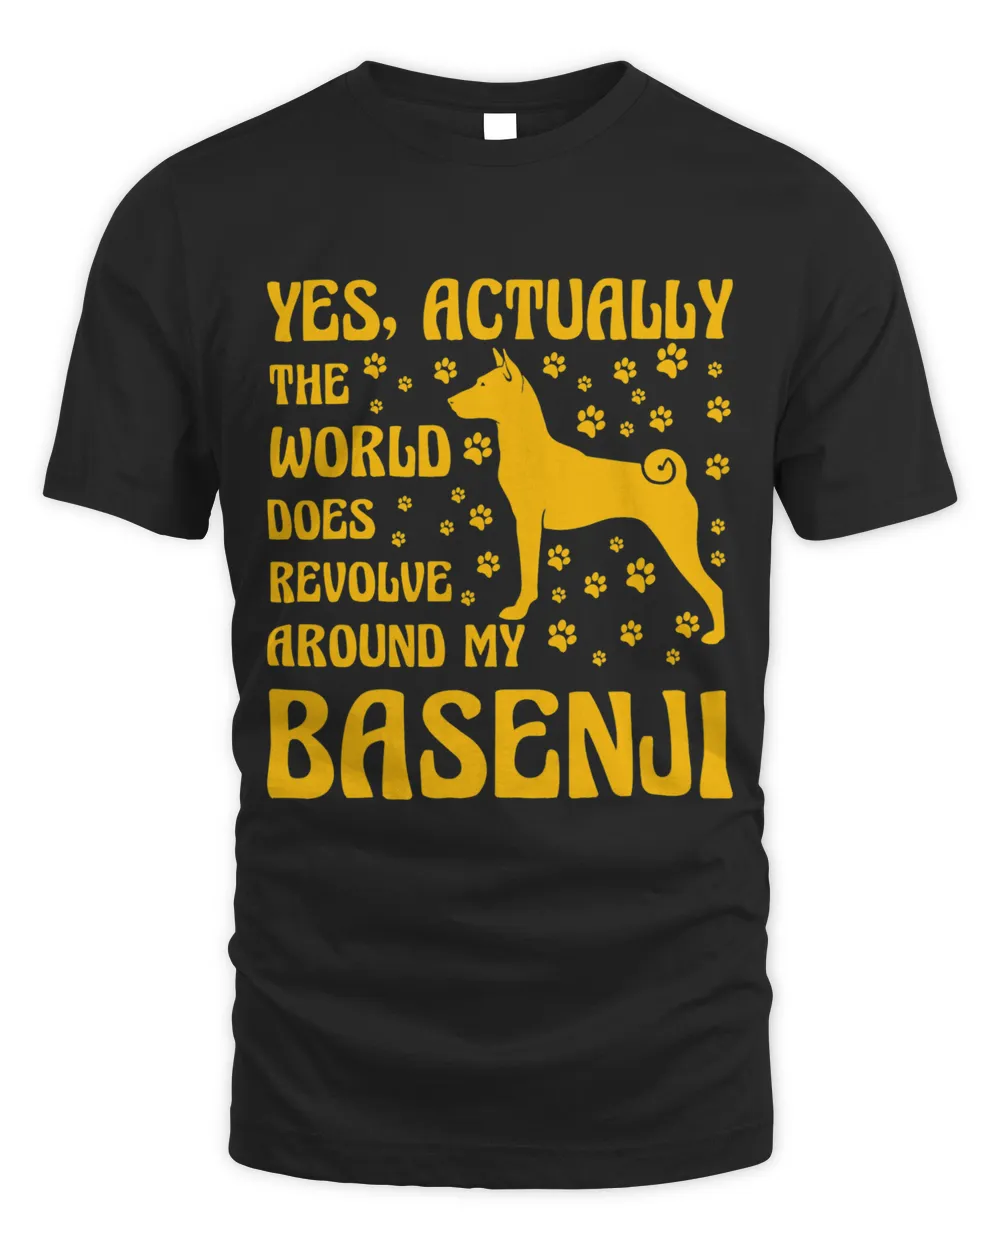 Yes actually the world does revolve around my Basenji